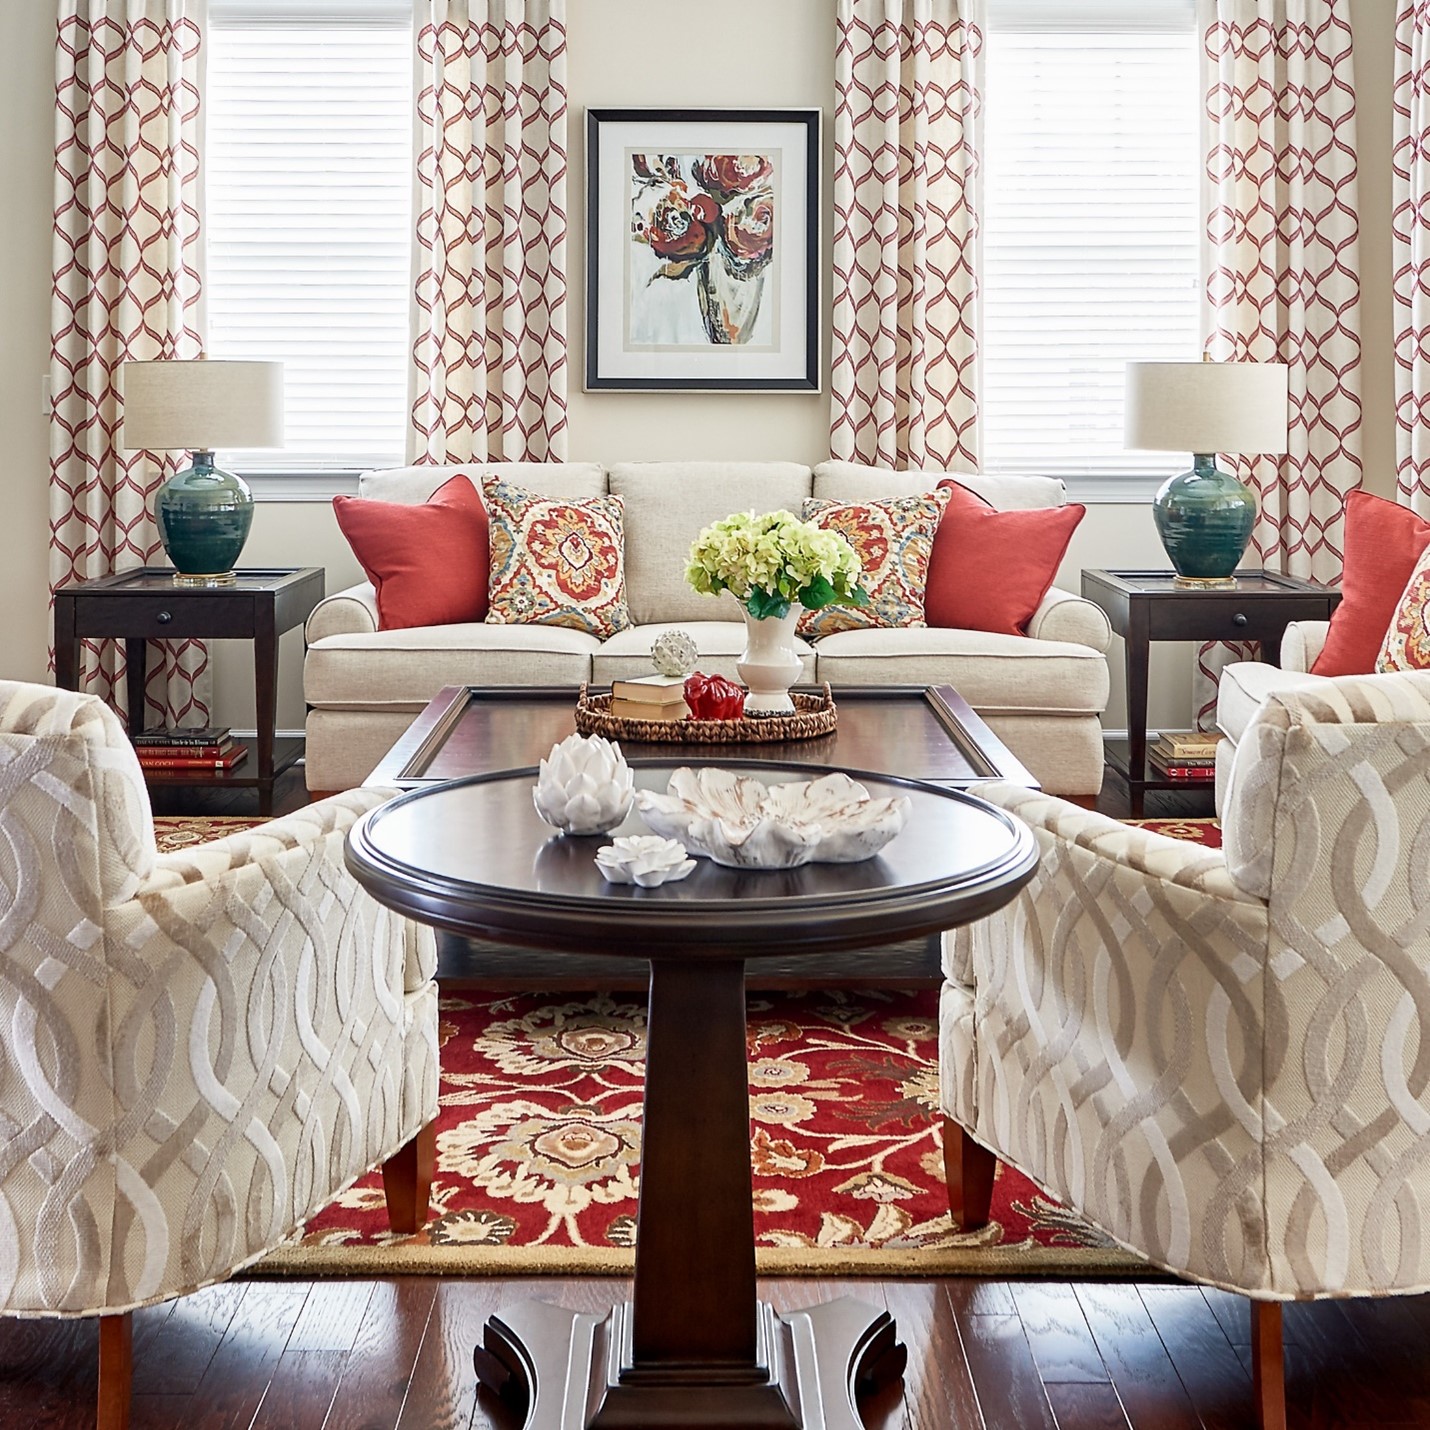 Family Room with nuetral sofa, textured chair fabric and bold red pillows and rug